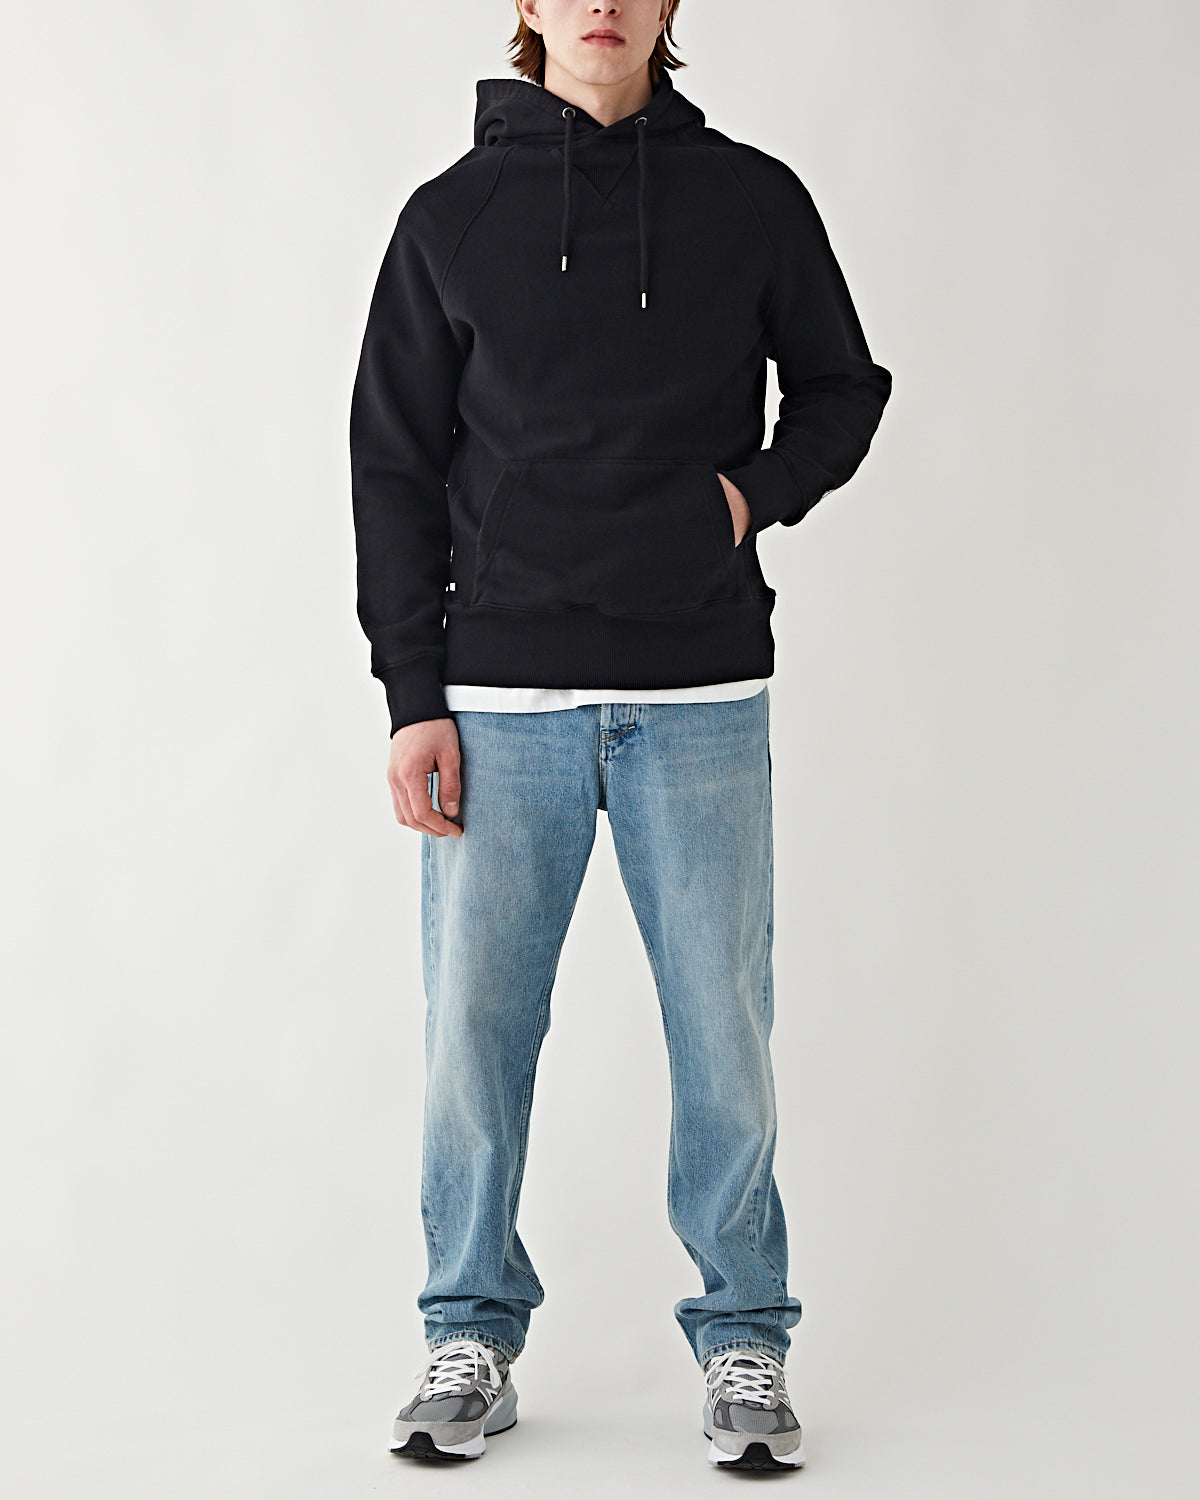 Tenue. Clay Washed Black Sweater Men